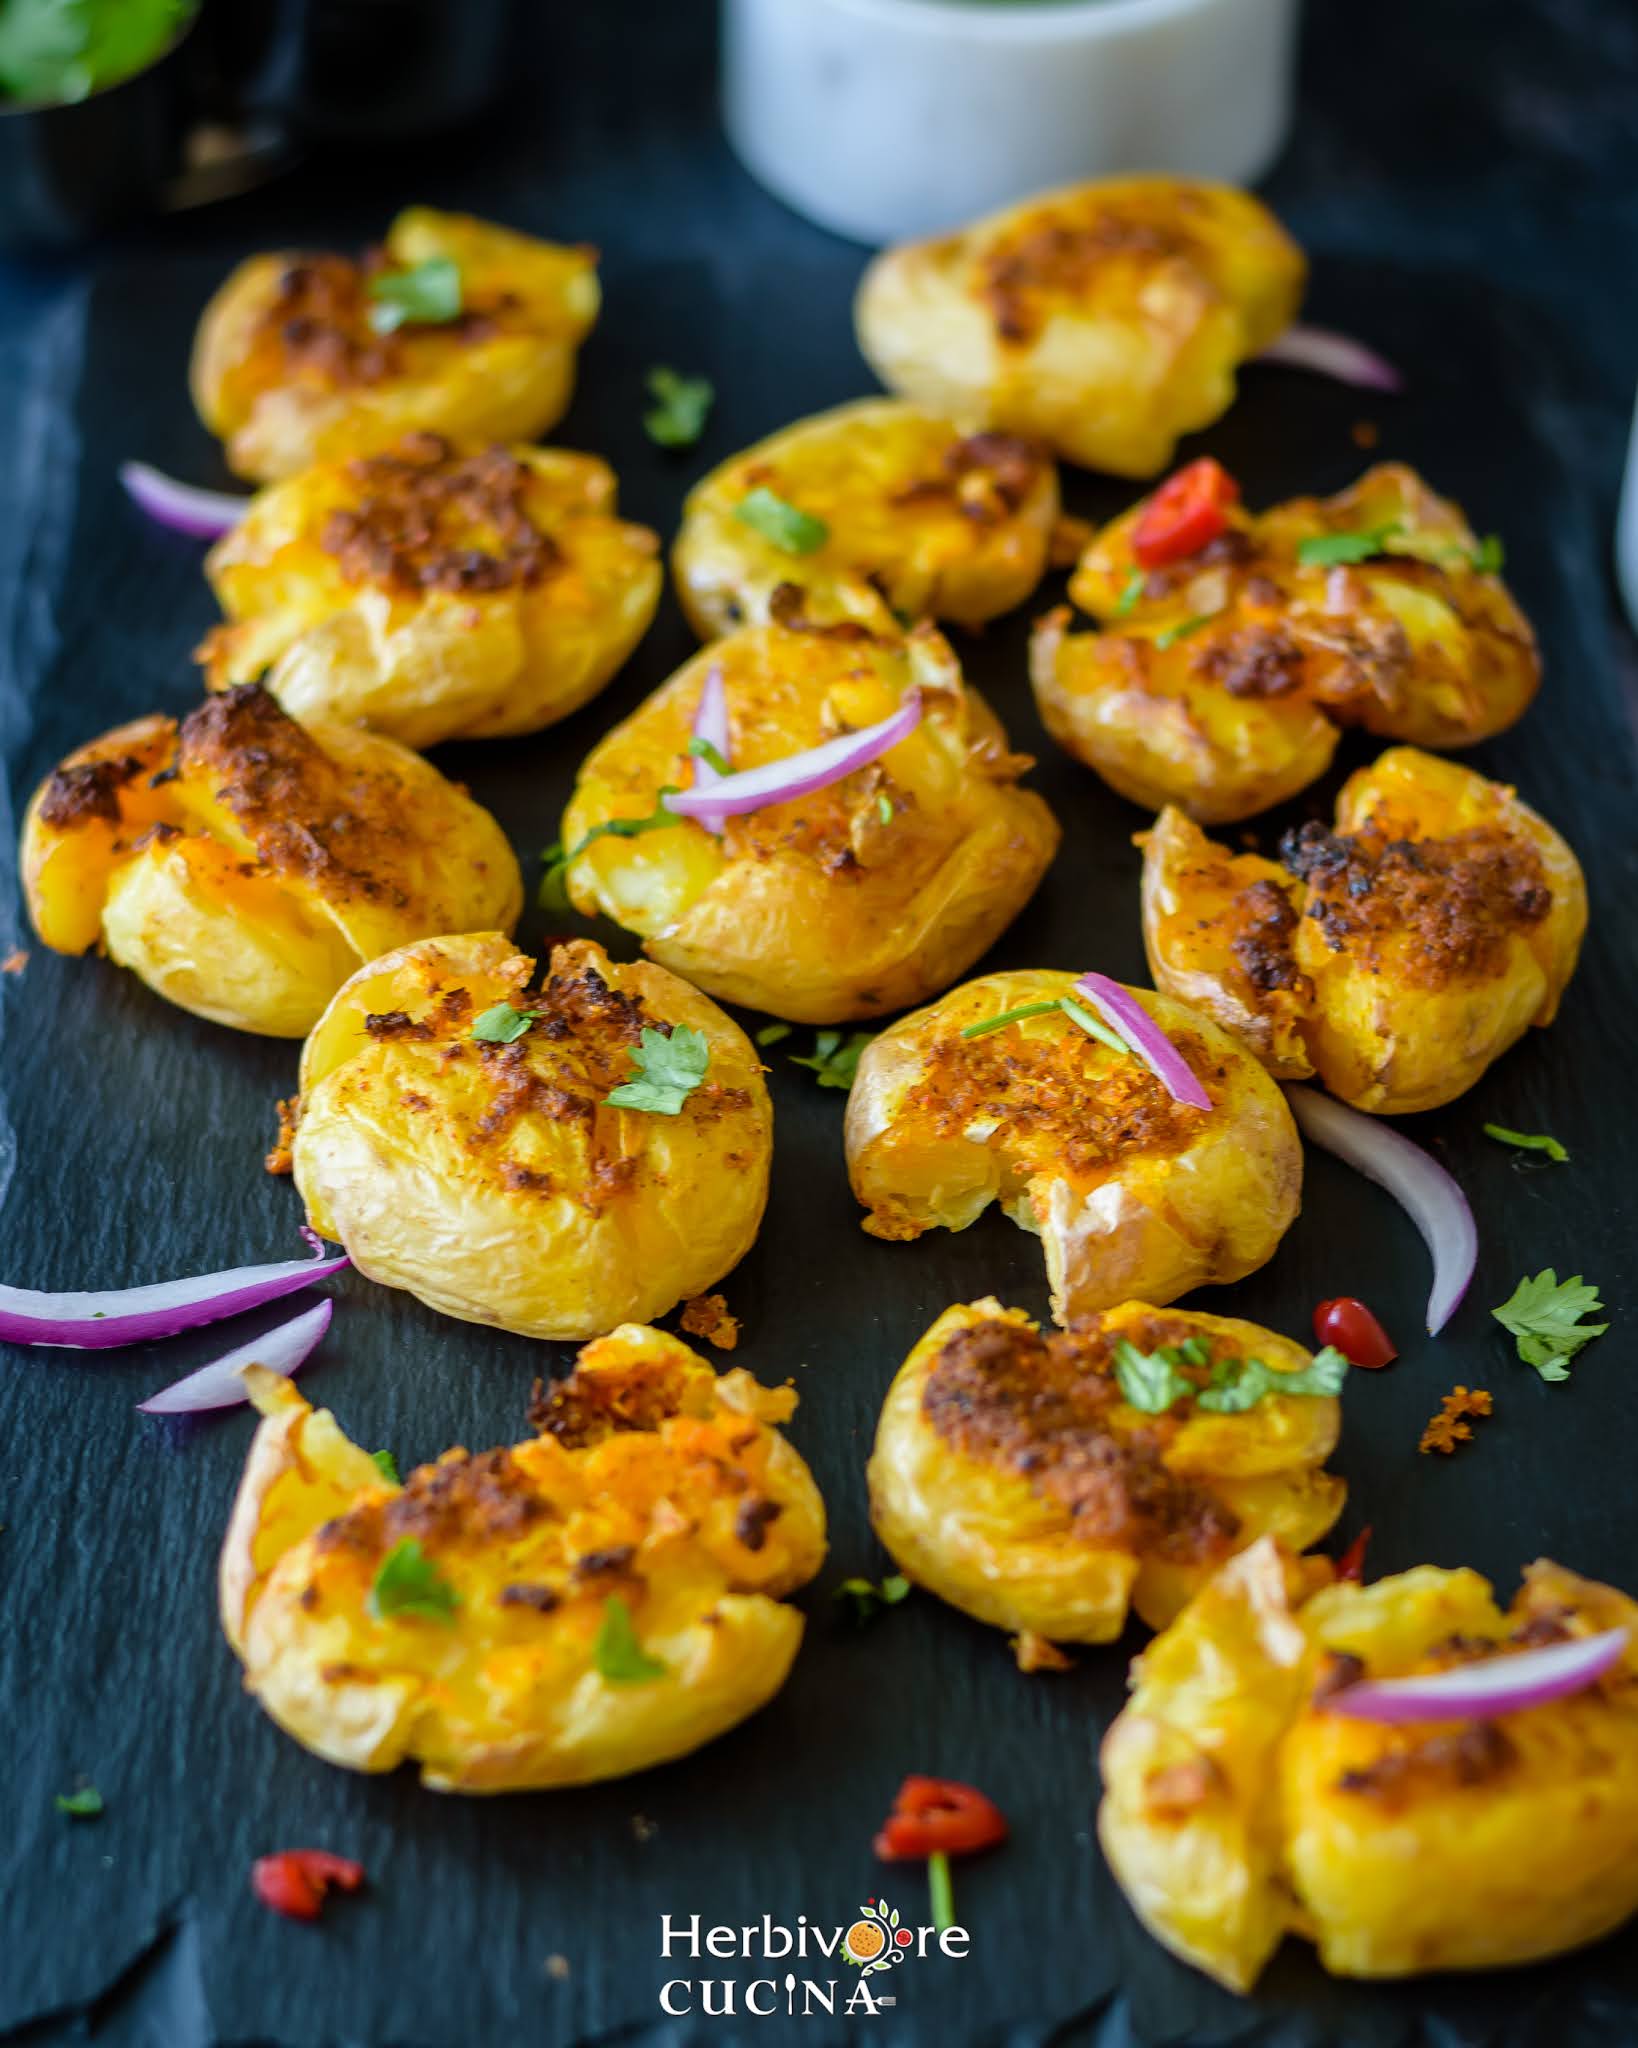 Air Fried Masala Smashed Potatoes topped with red onions, chili and cilantro.